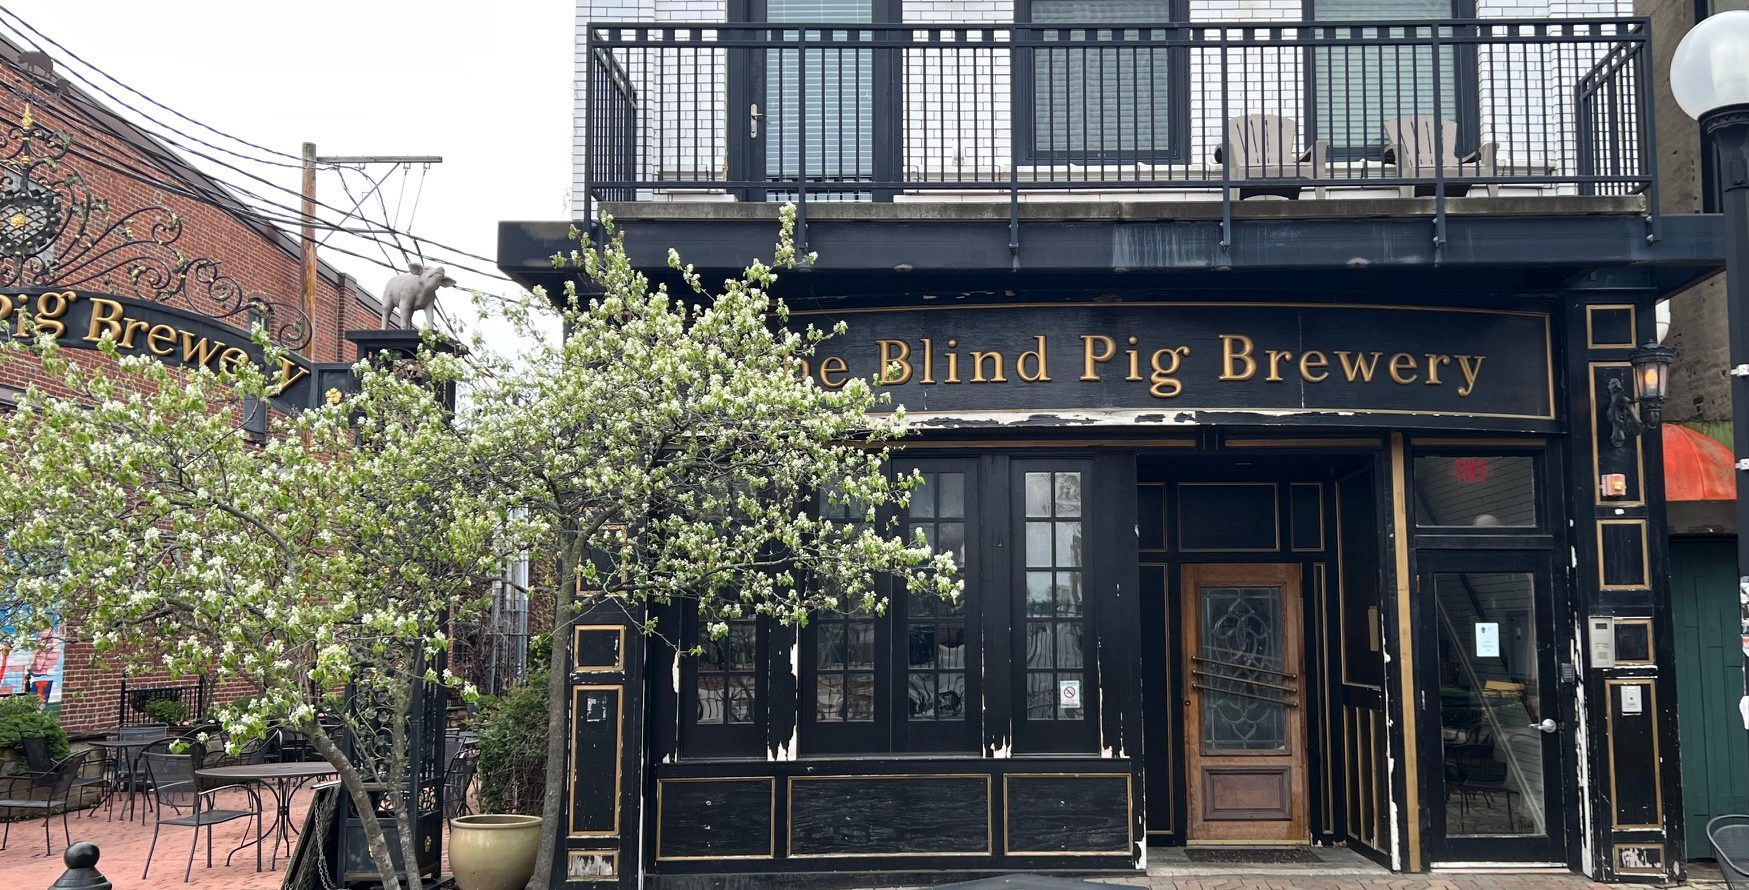 The front of the Taylor Street entrance to The Blind Pig Brewery on Neil Street.